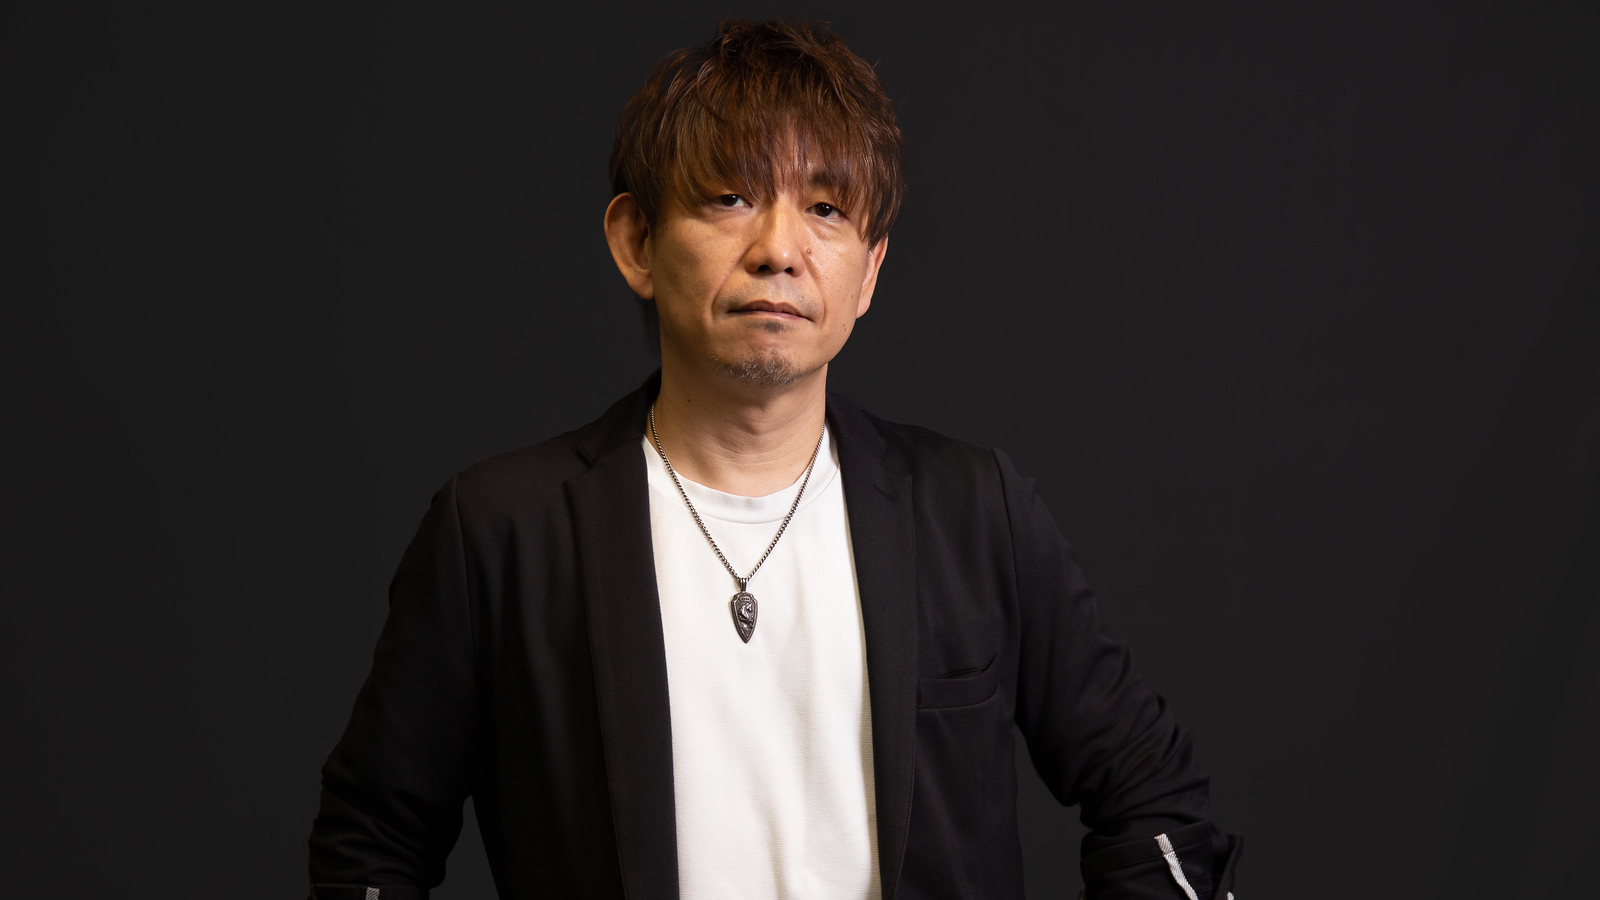 Final Fantasy series "struggling" to adapt to industry trends, says Yoshi P